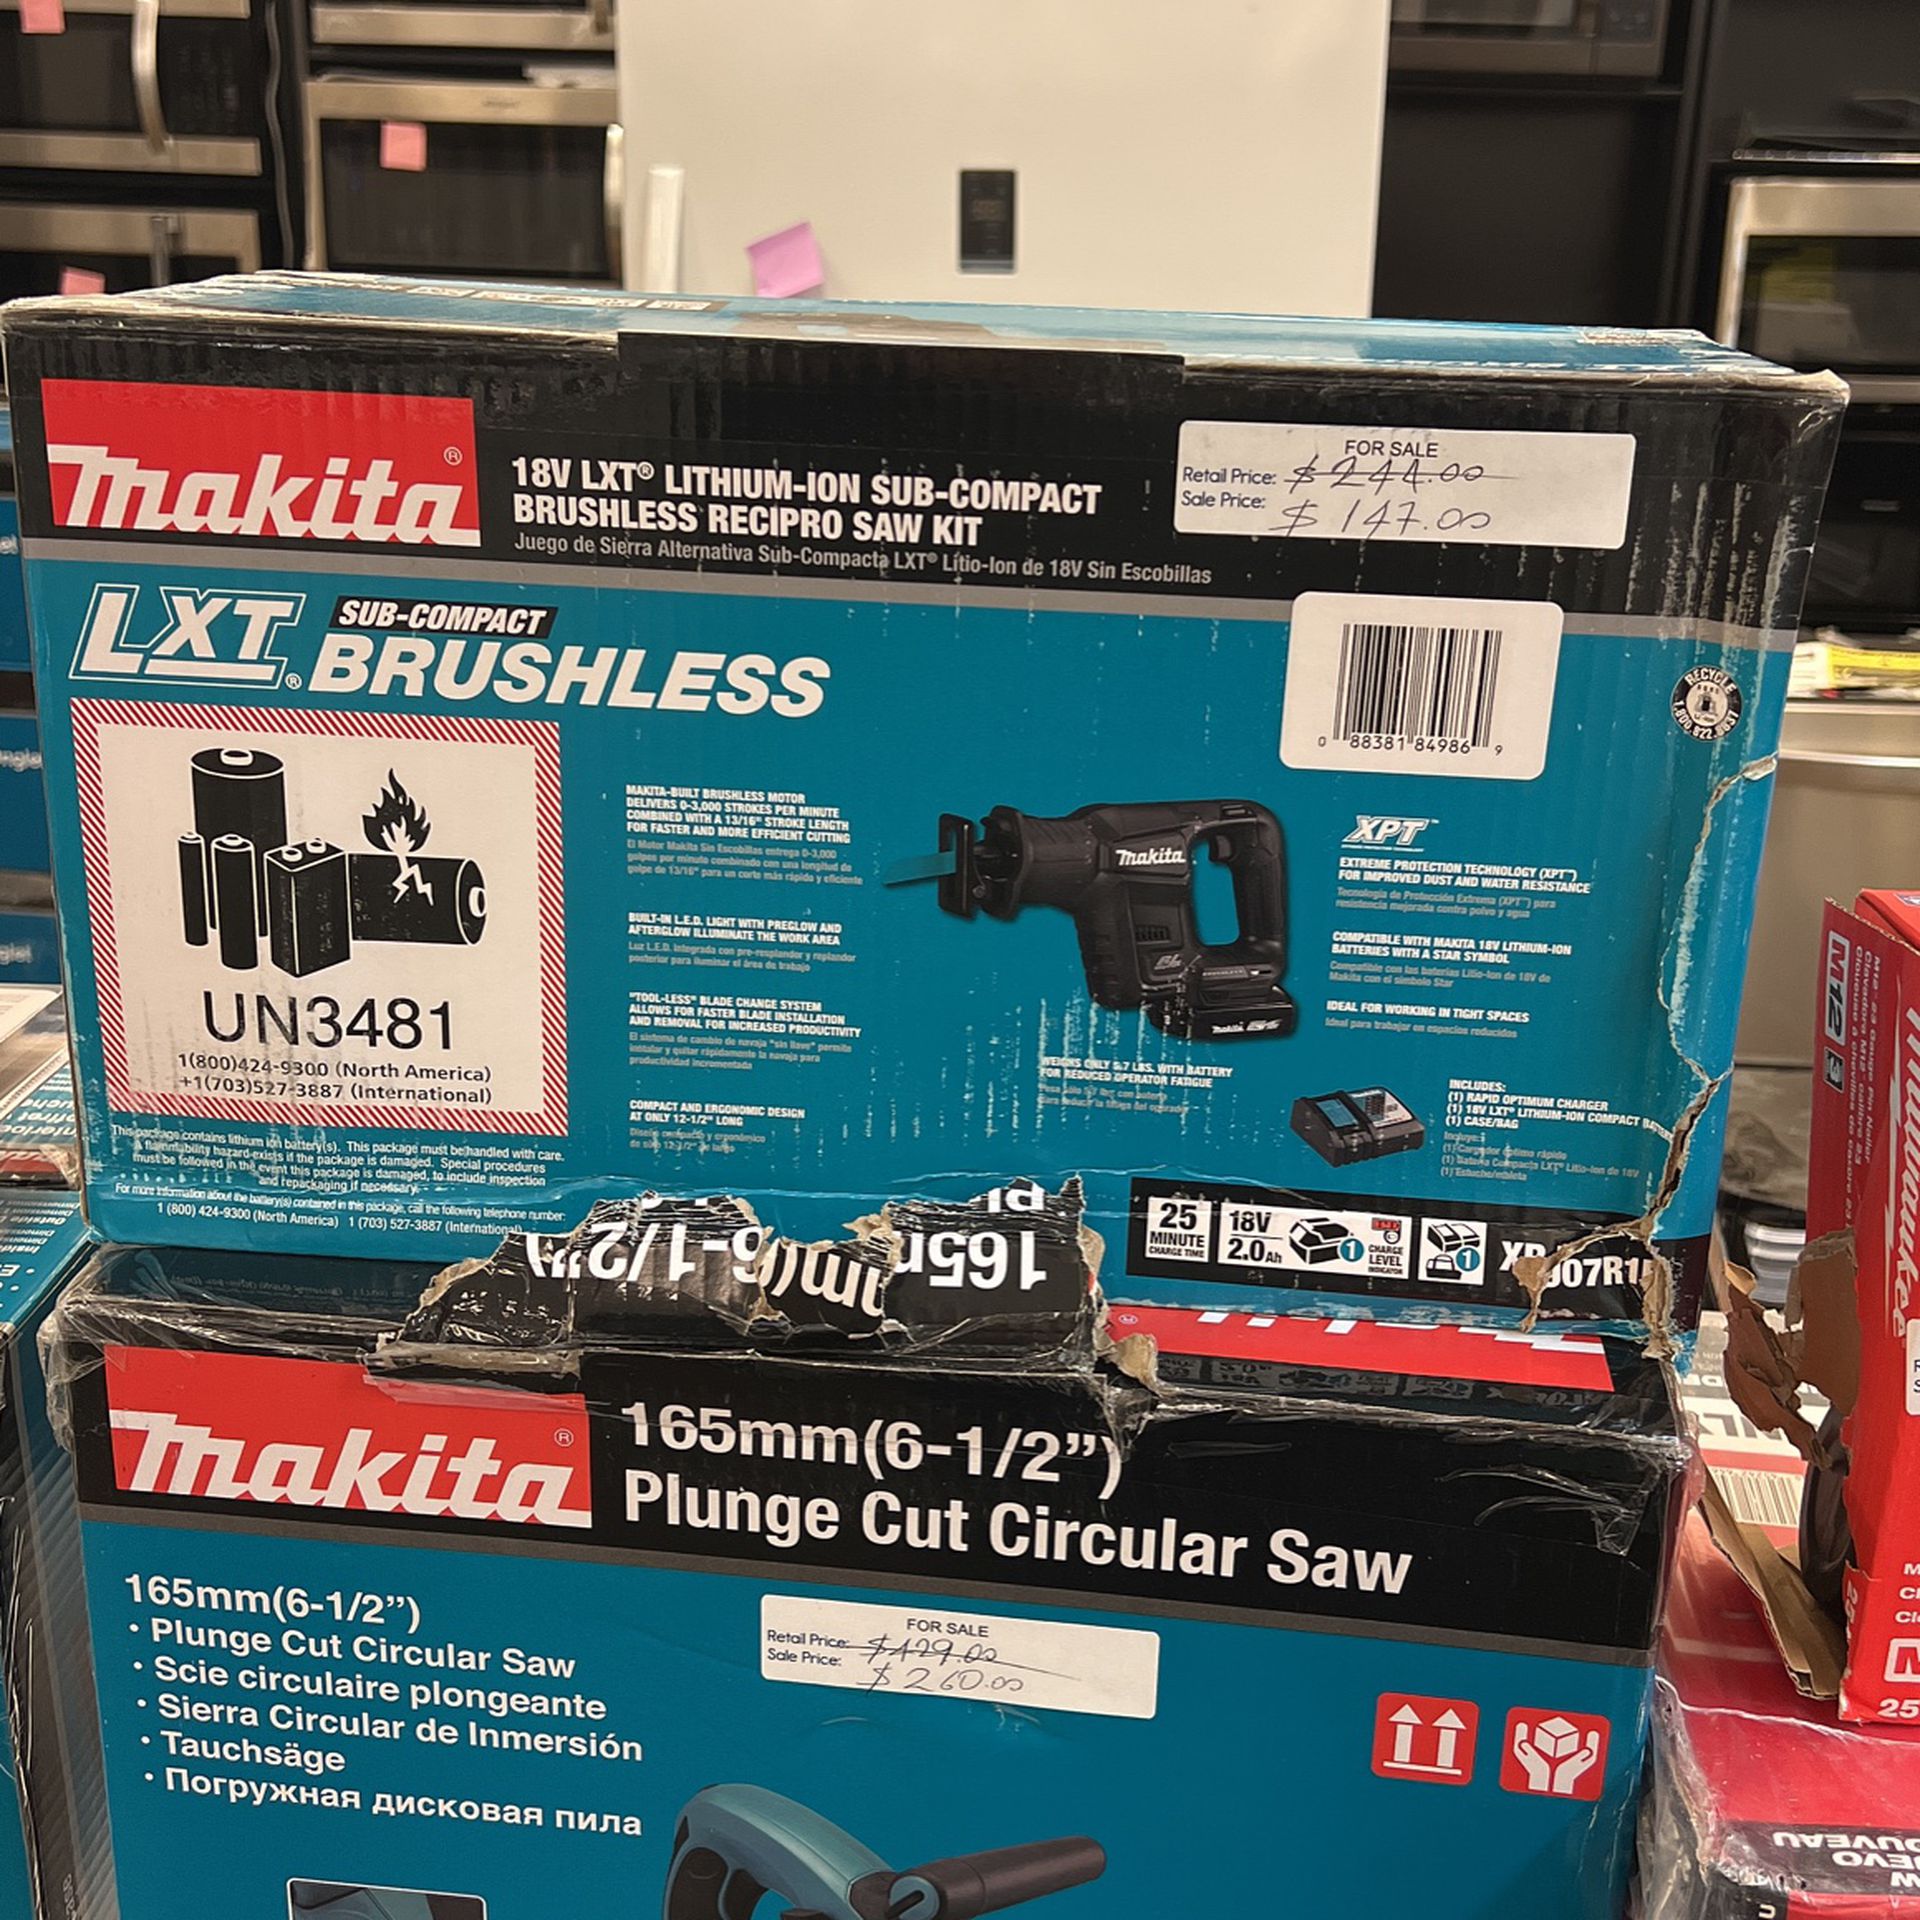 New Makita 18V LXT Sub-Compact Lithium-Ion Brushless Cordless Recipro Saw  Kit (2.0 Ah) for Sale in Everett, WA OfferUp